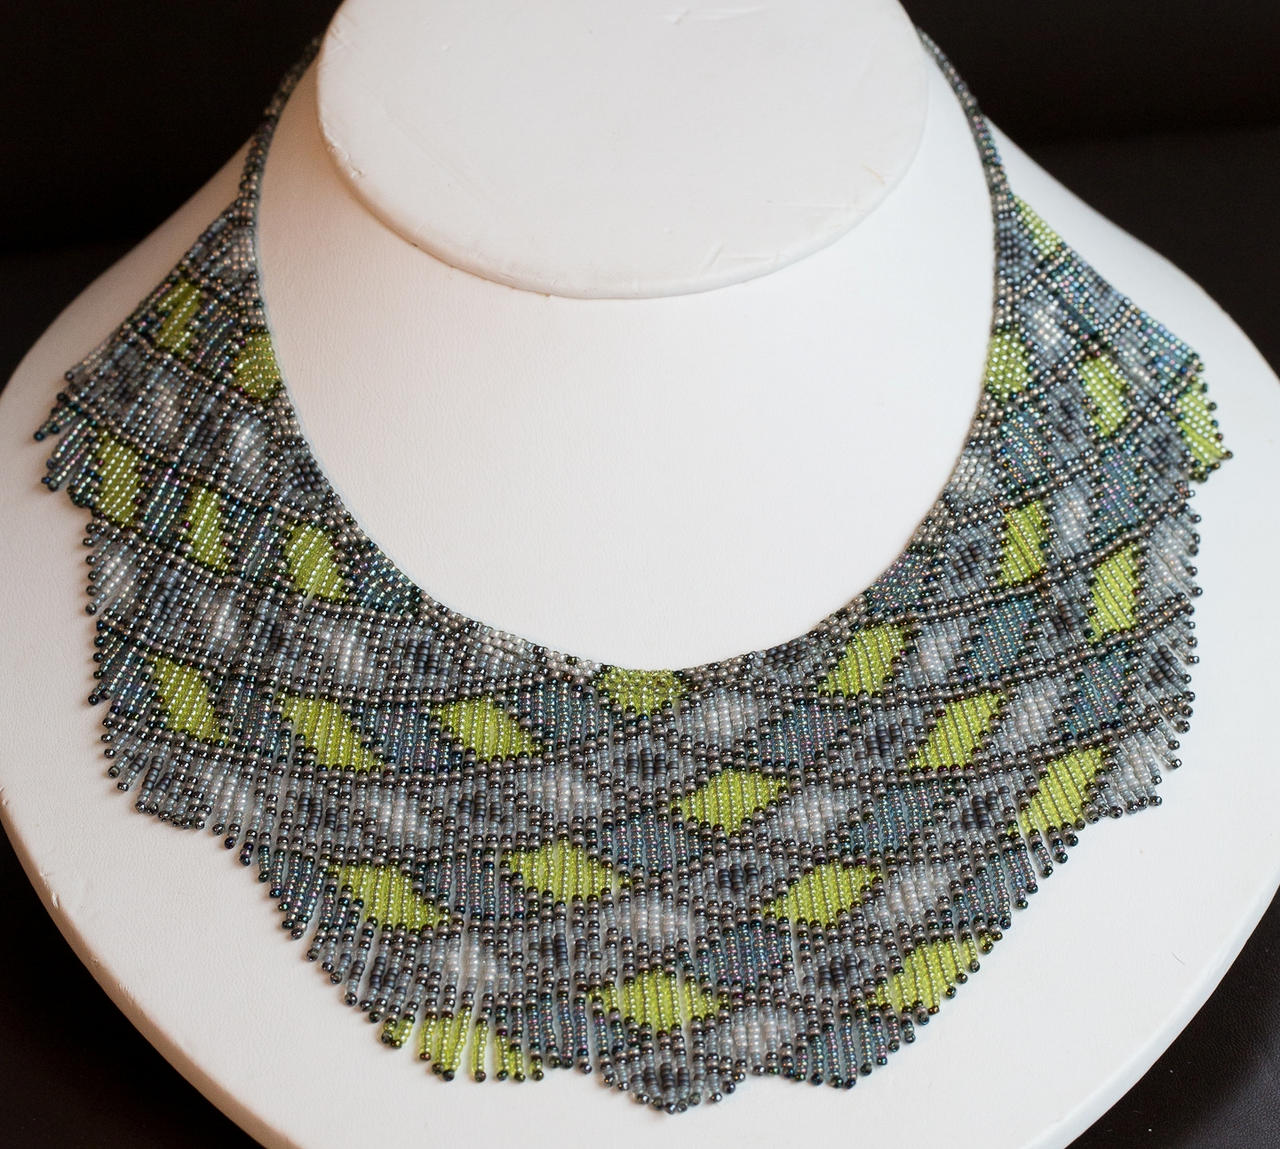 helmineitsyt_1_4_2__seed_bead_necklace__gray_lime_by_axmxz-d50tgad.jpg